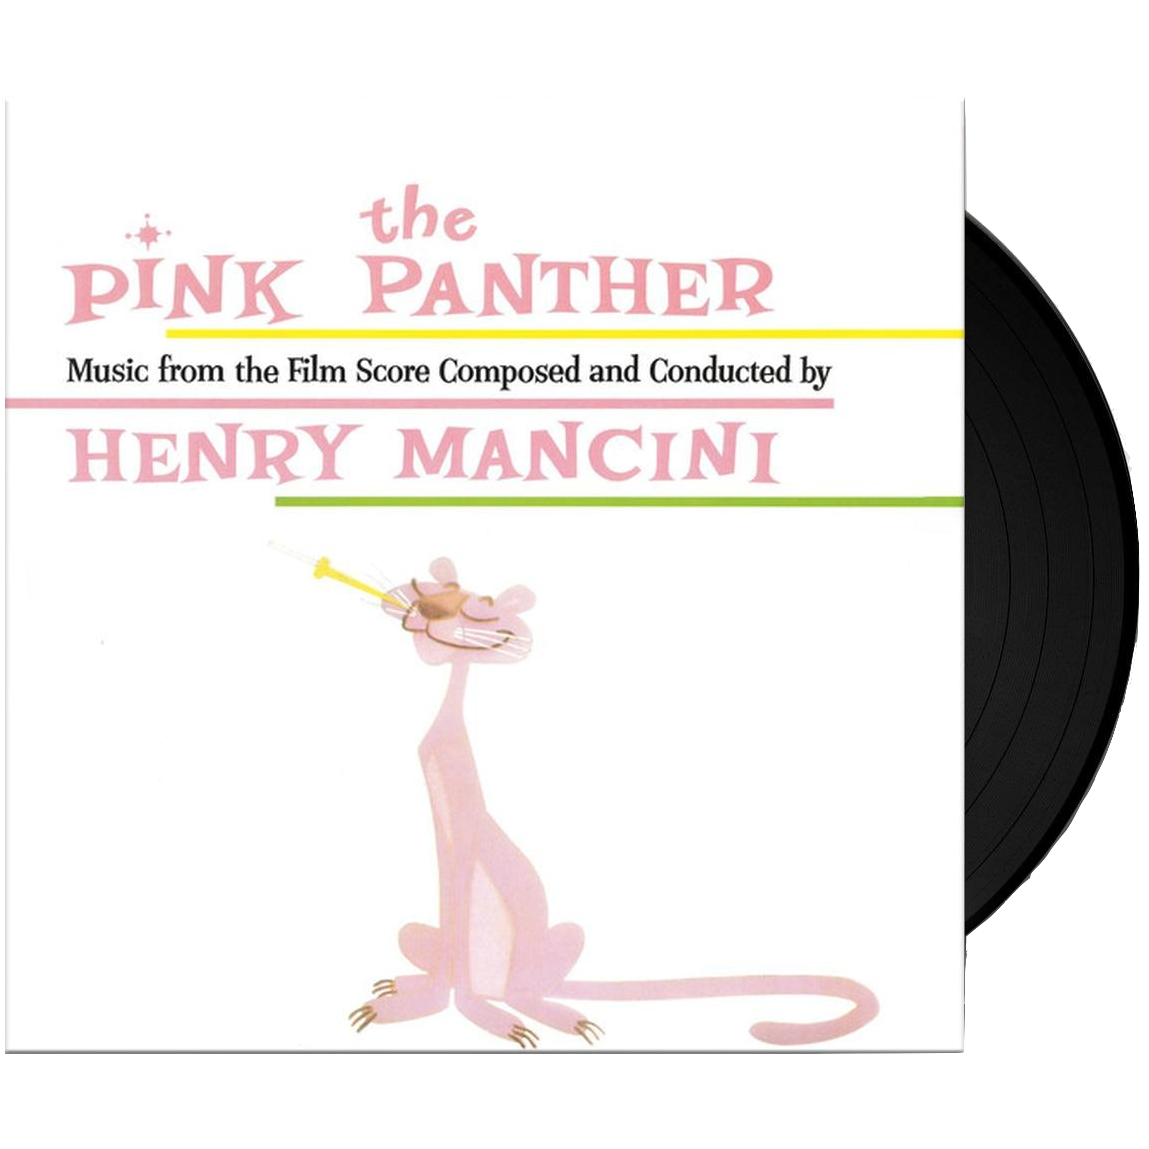 Henry Mancini - The Pink Panther (Music From The Film Score) (Deluxie) (LP) - Joco Records